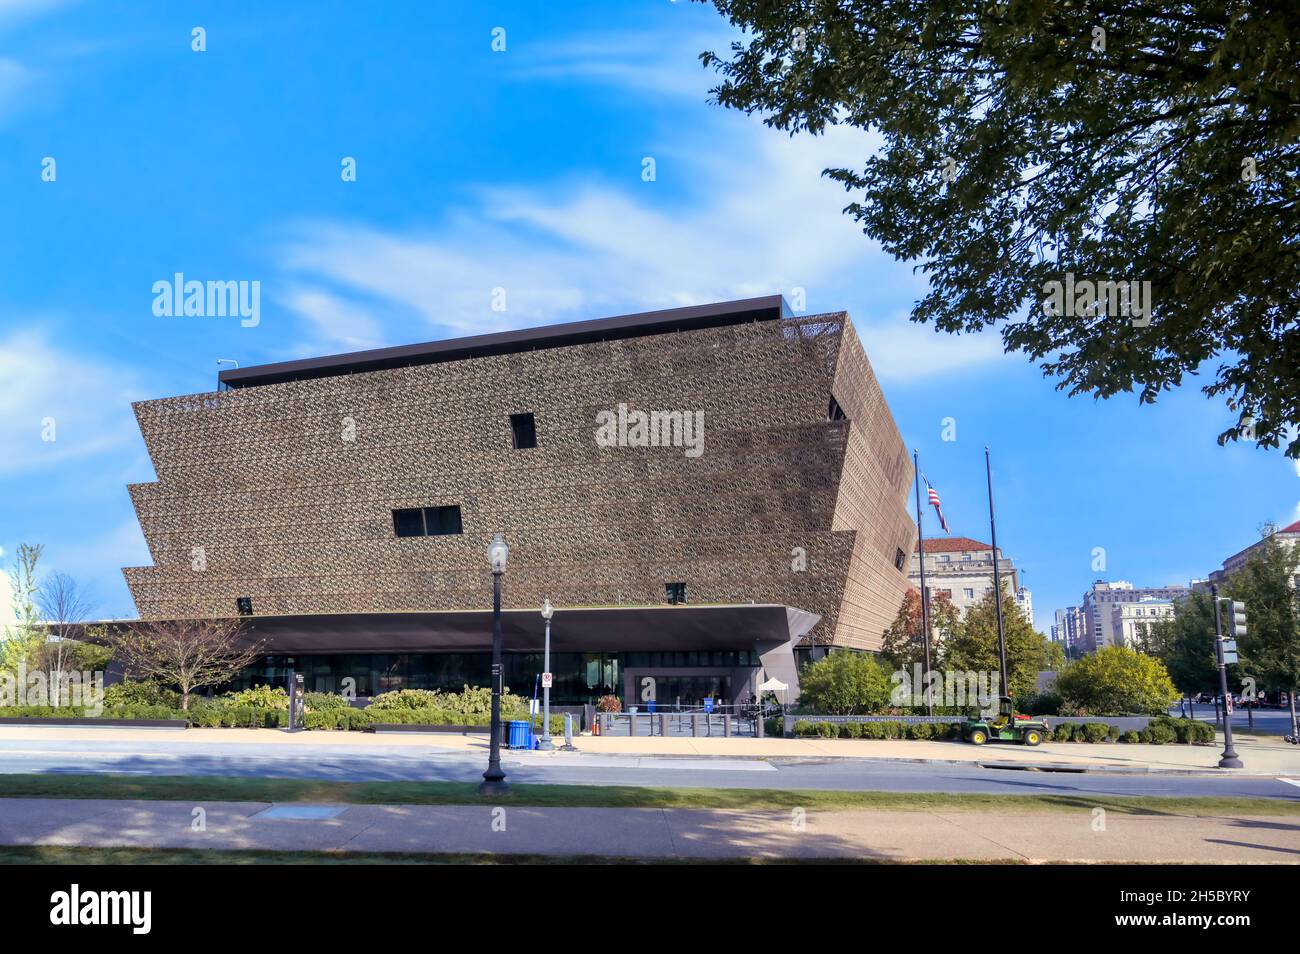 Washington, D.C. - October 14th, 2021: The Smithsonian's National Museum of African American History and Culture on the National Mall. Stock Photo